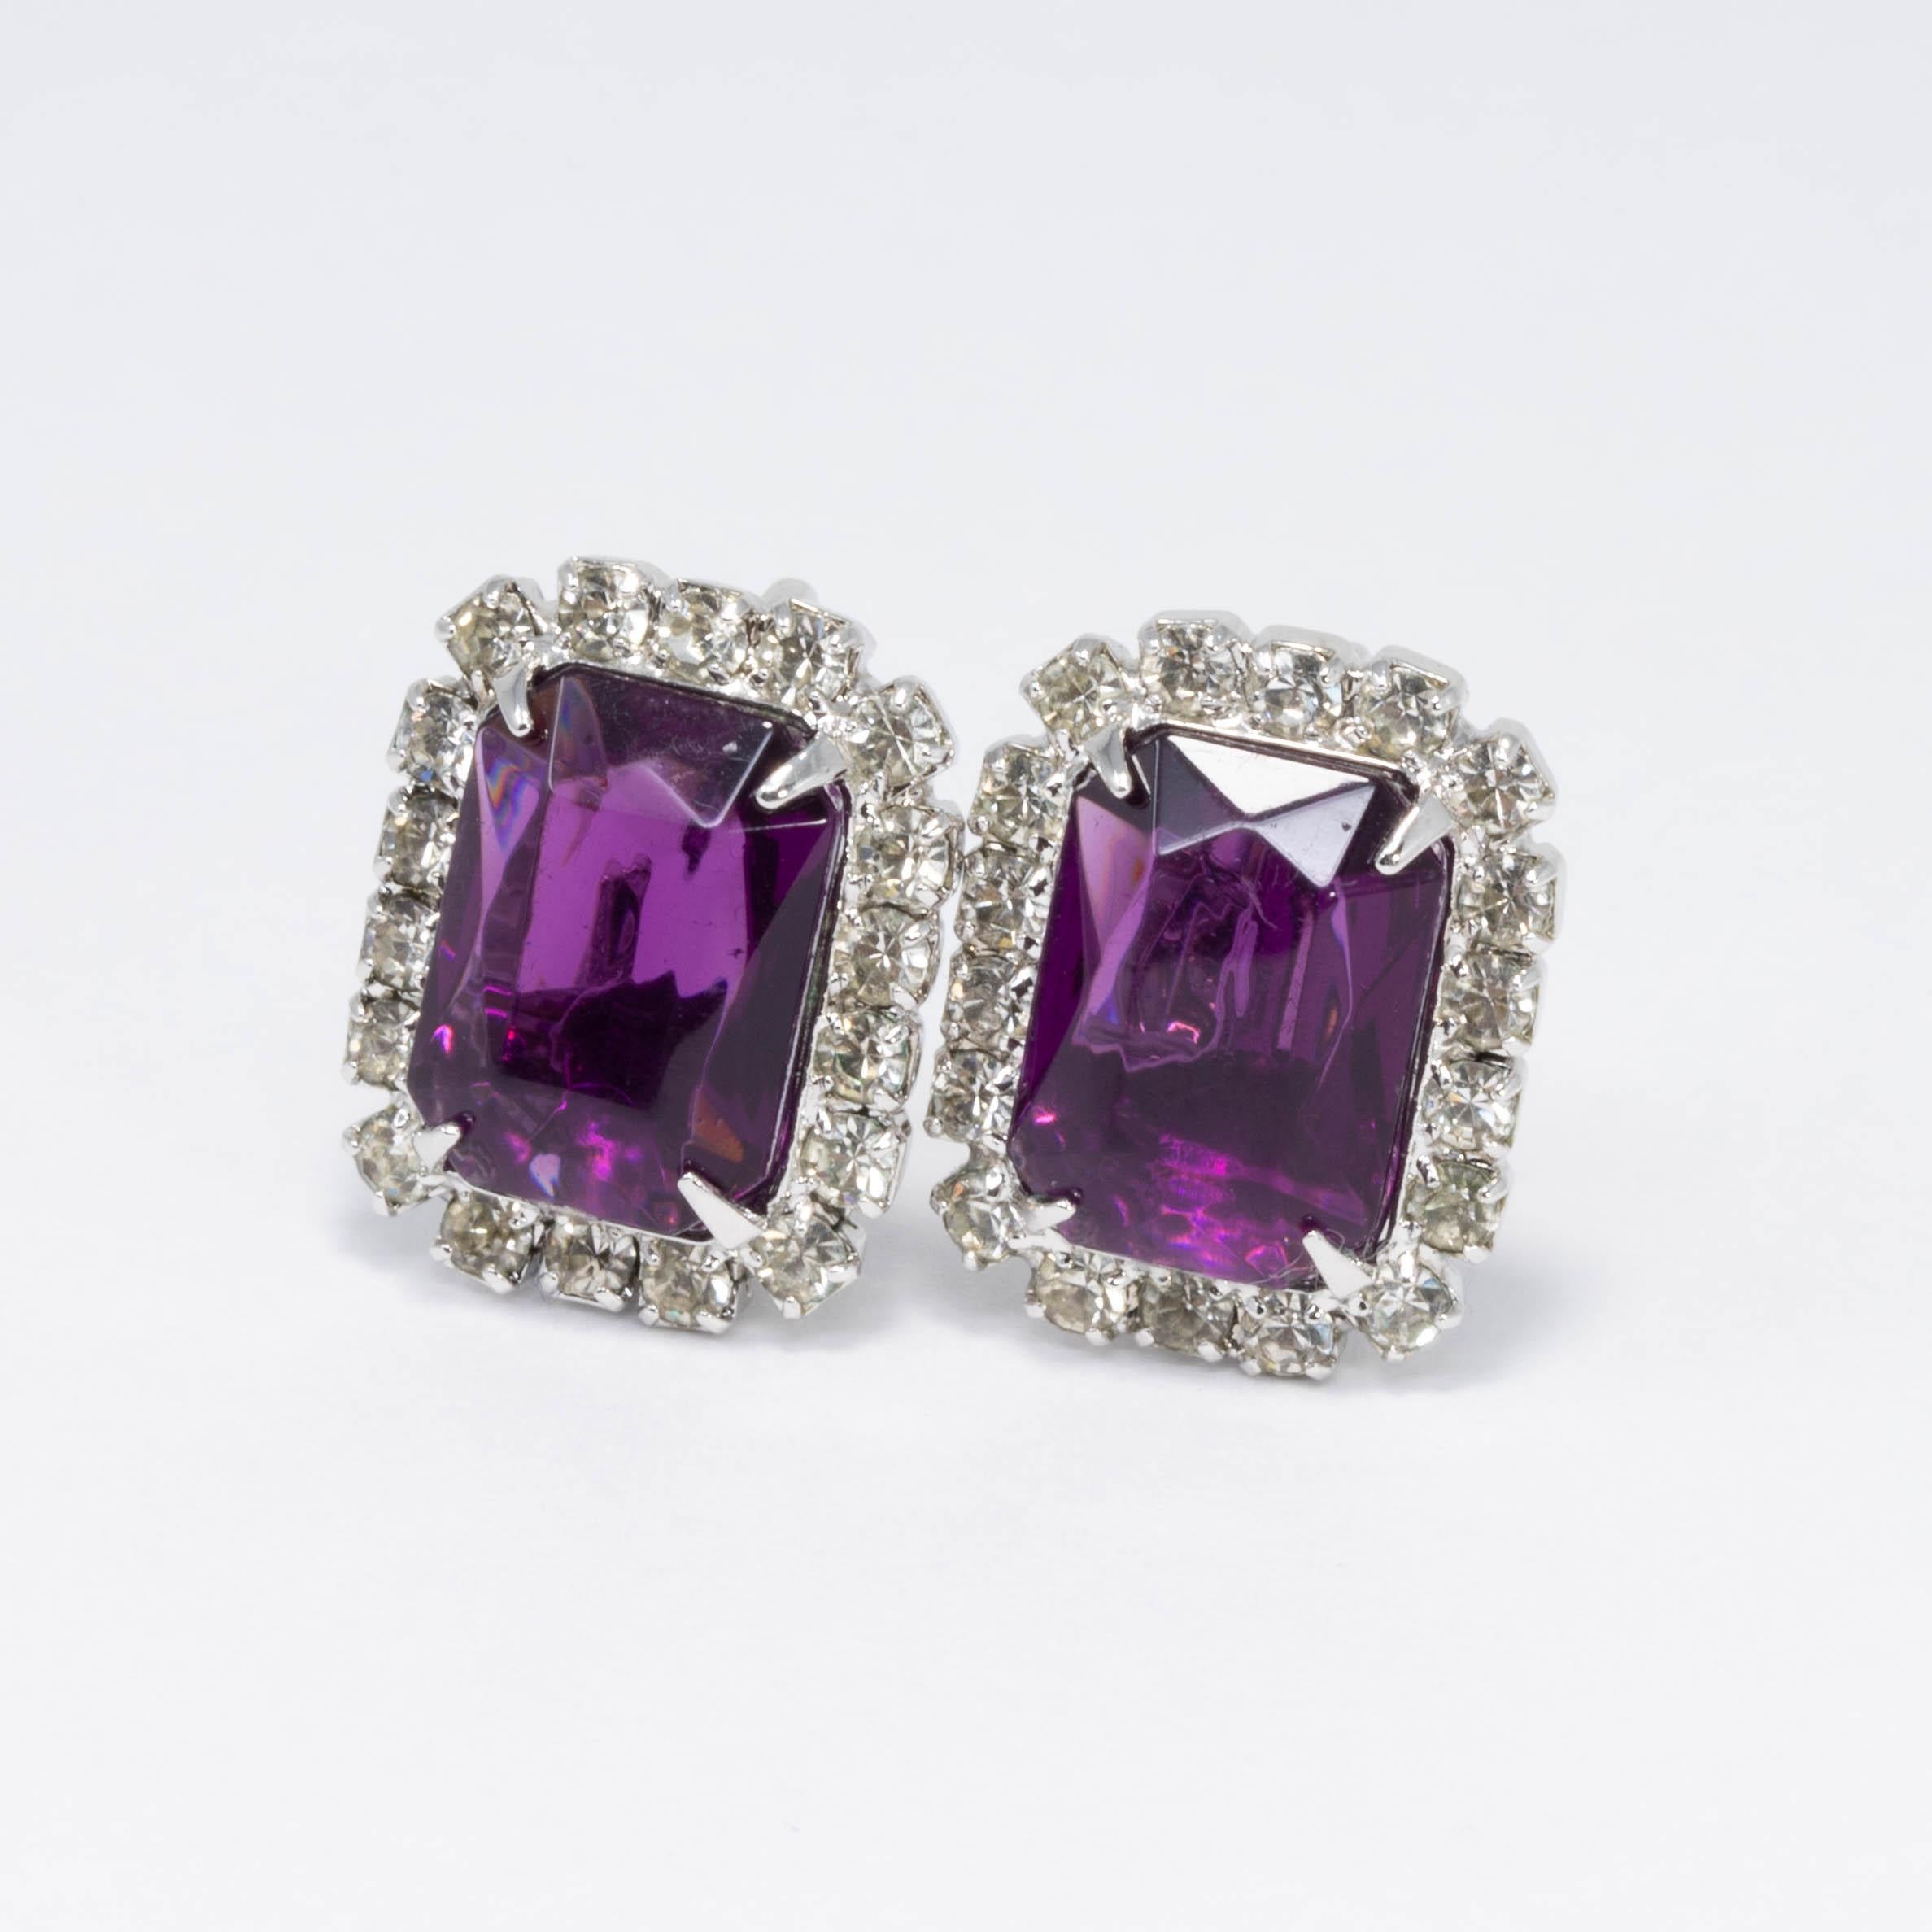 A pair of dazzling vintage clip on earrings. Vibrant amethyst colored crystals are prong set in the center, decorated around with sparkling clear crystals. Silvertone metal, open backs.

